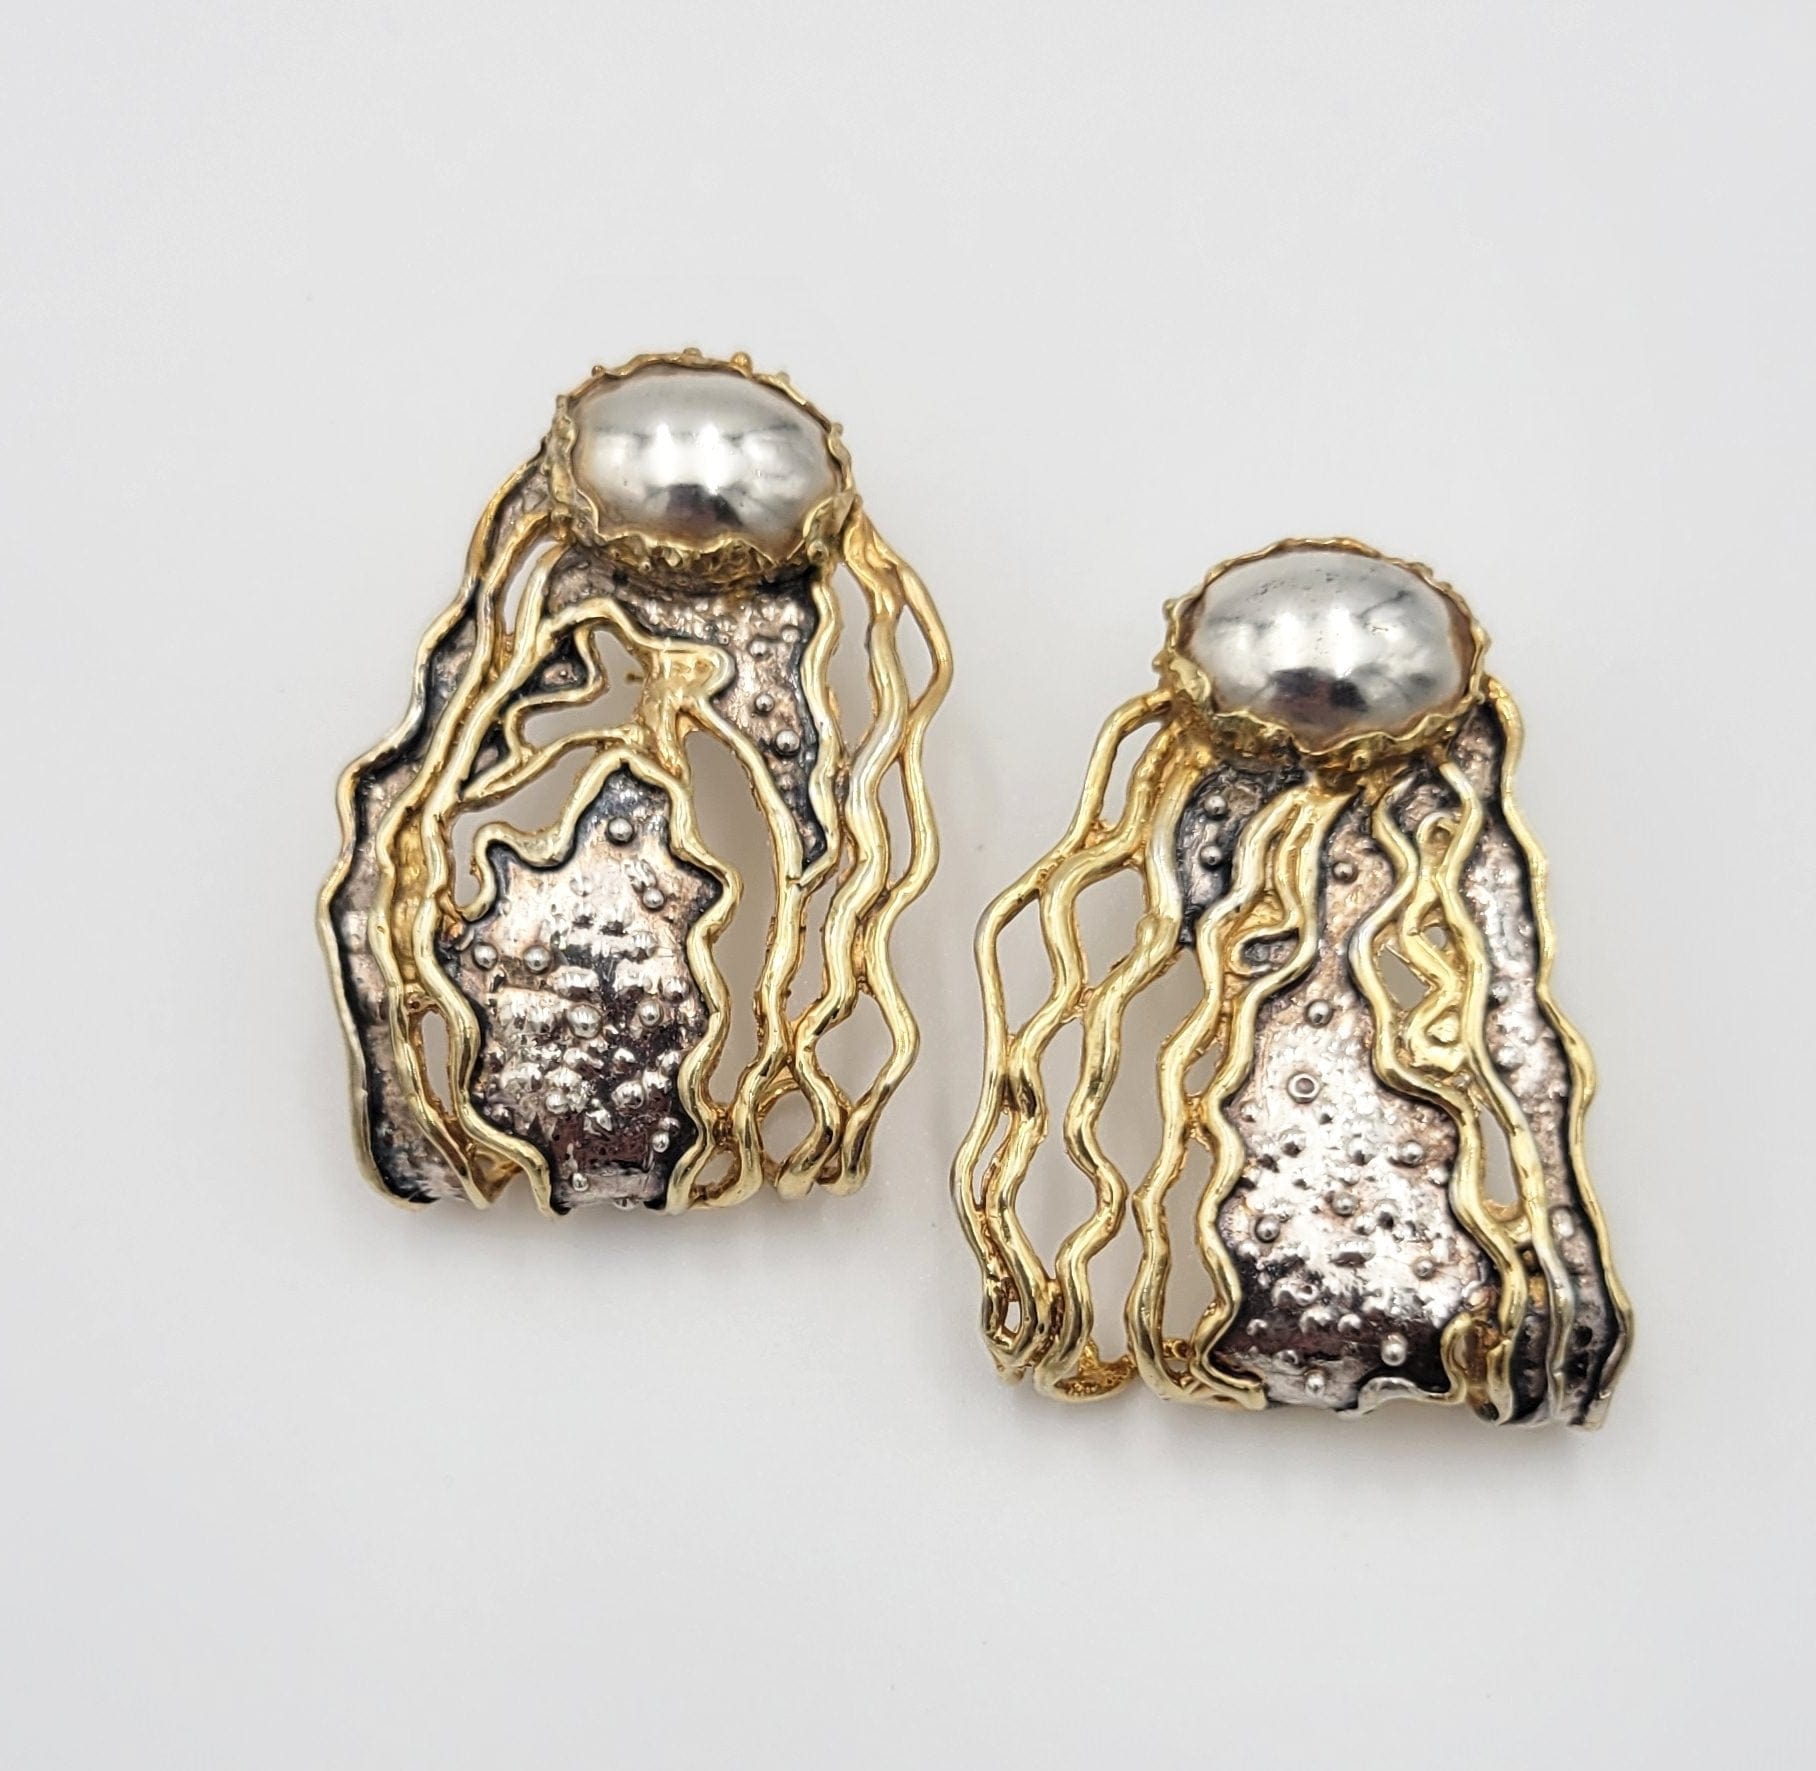 William & Shellie Jewelry FAB! Designer William & Shellie NYC Modernist 2-Tone Sterling Earrings Circa 1980s